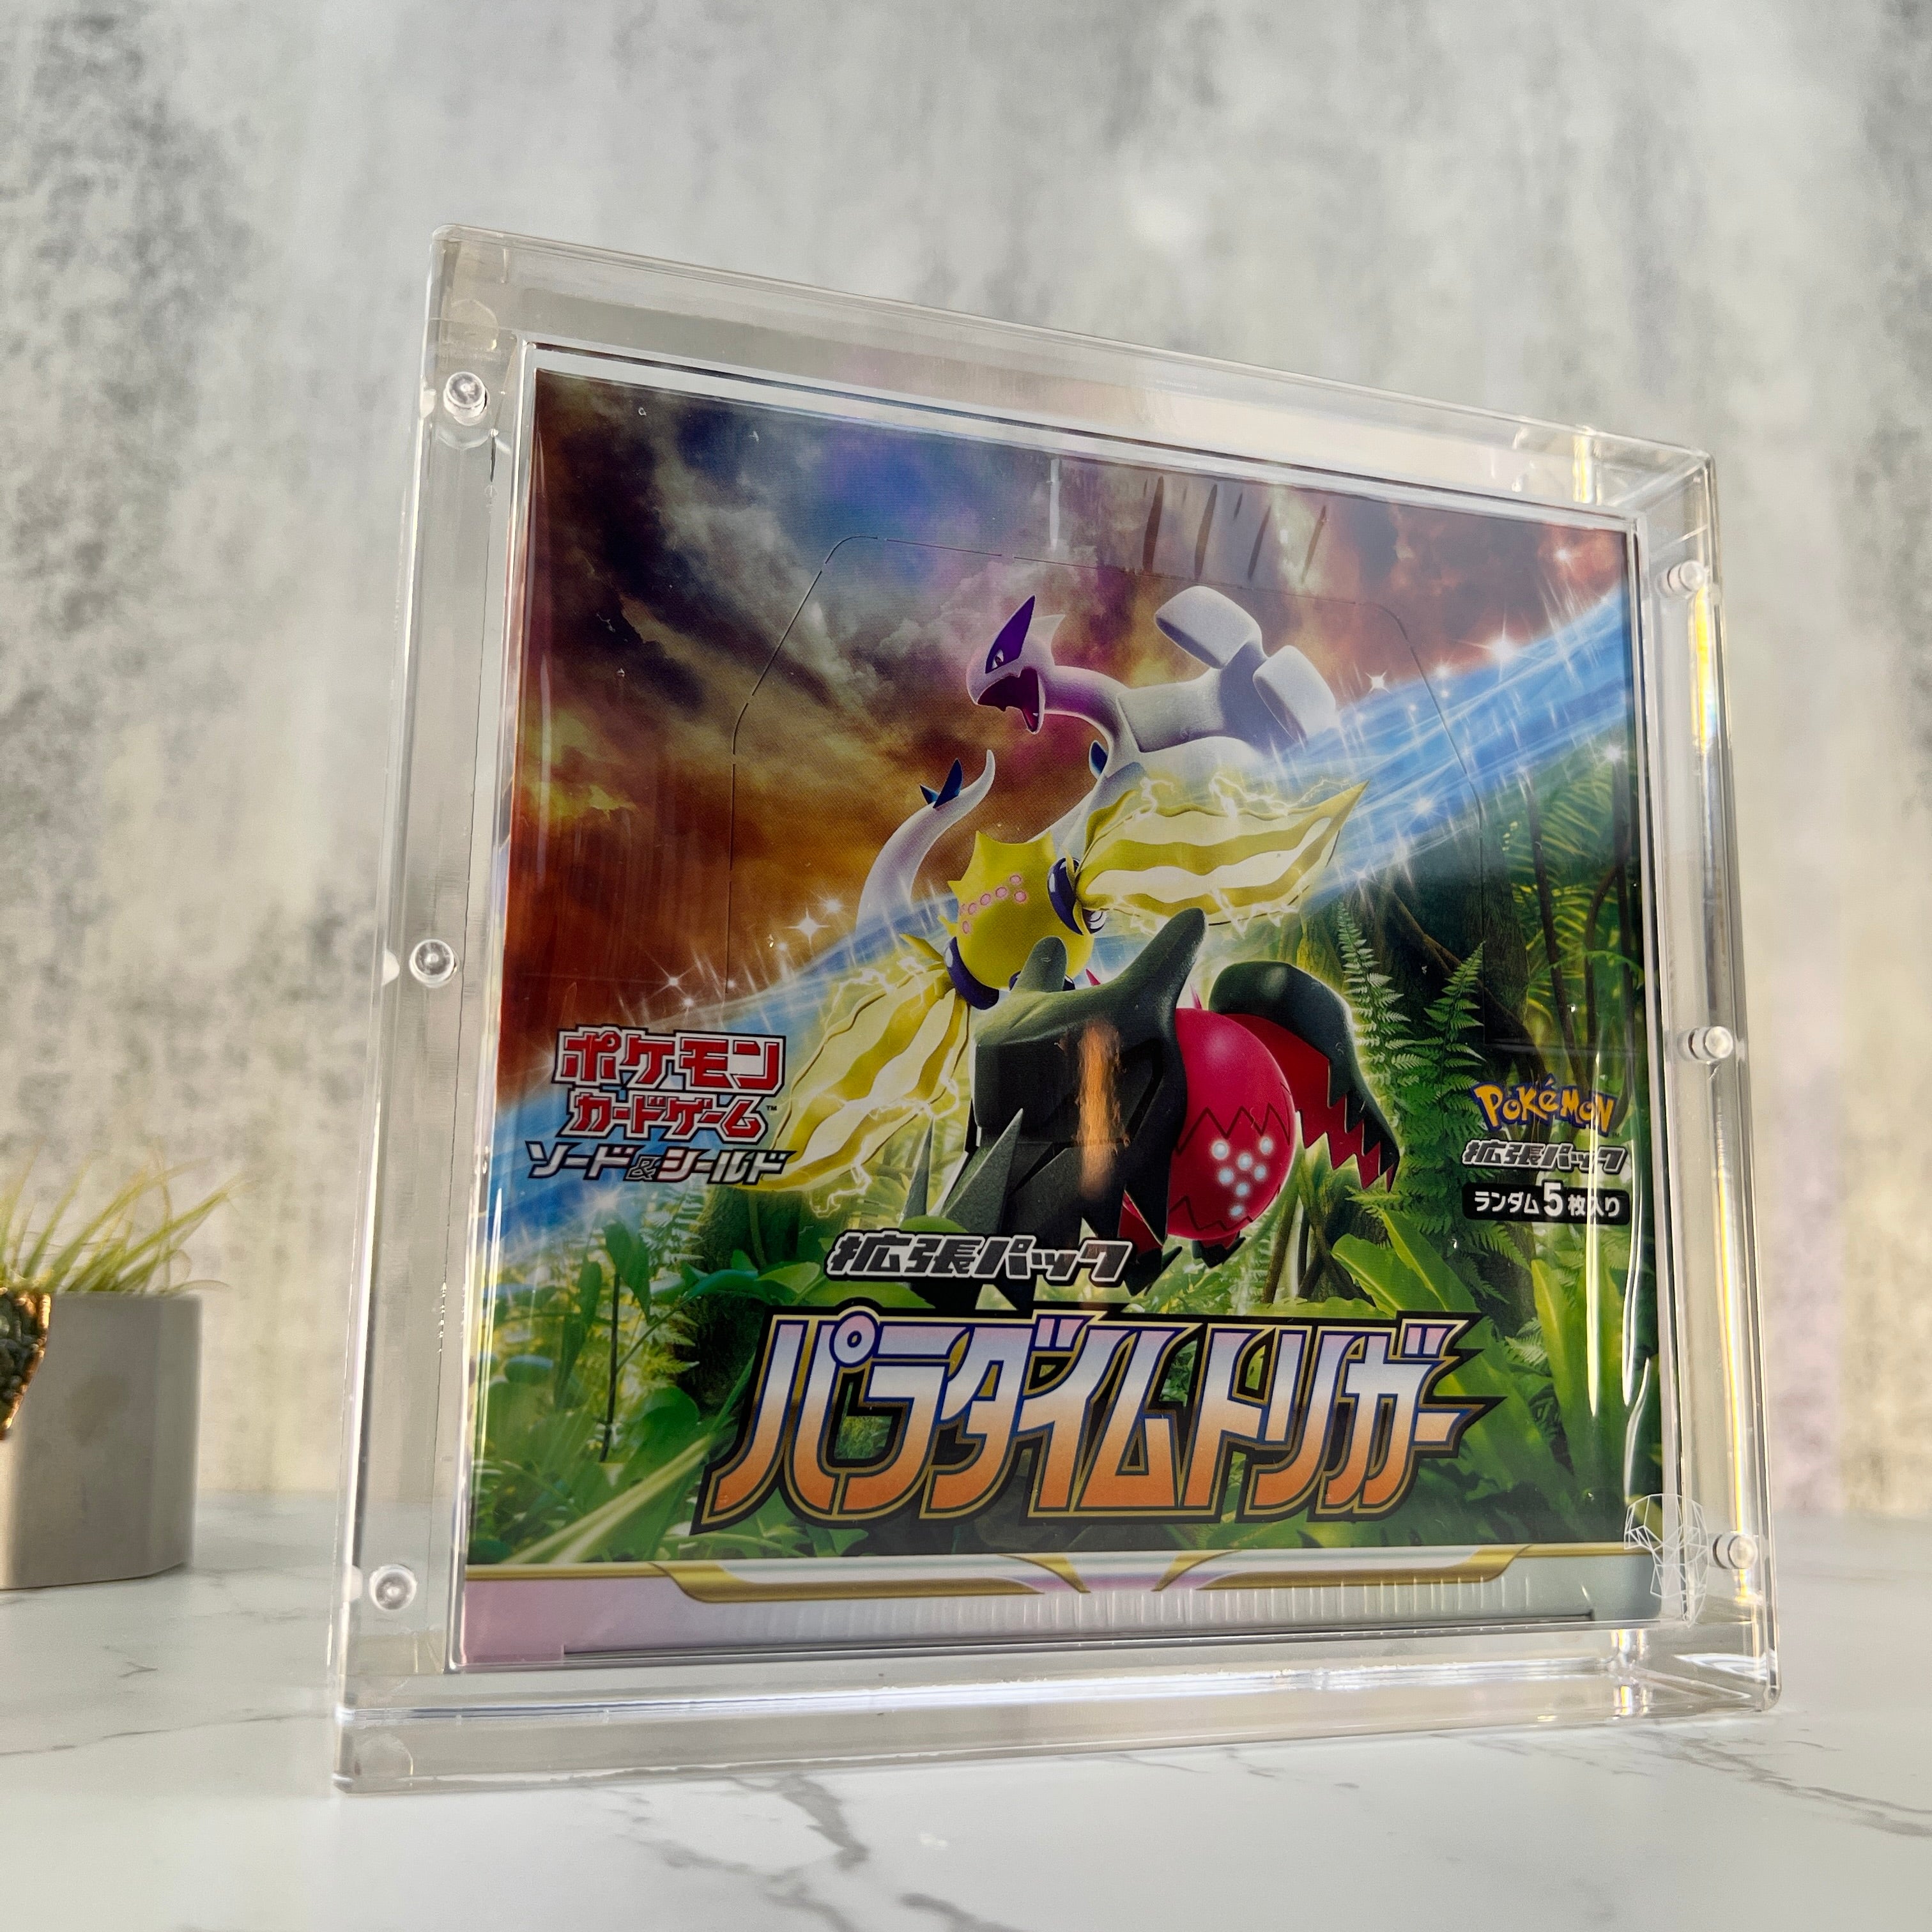 Ultra clear Pokemon Japanese booster box magnetic acrylic protective case, with crystal acrylic, with 99.6% UV protection against sun damage and fading. Fits Eevee Heroes, Scarlet & Violet and more.